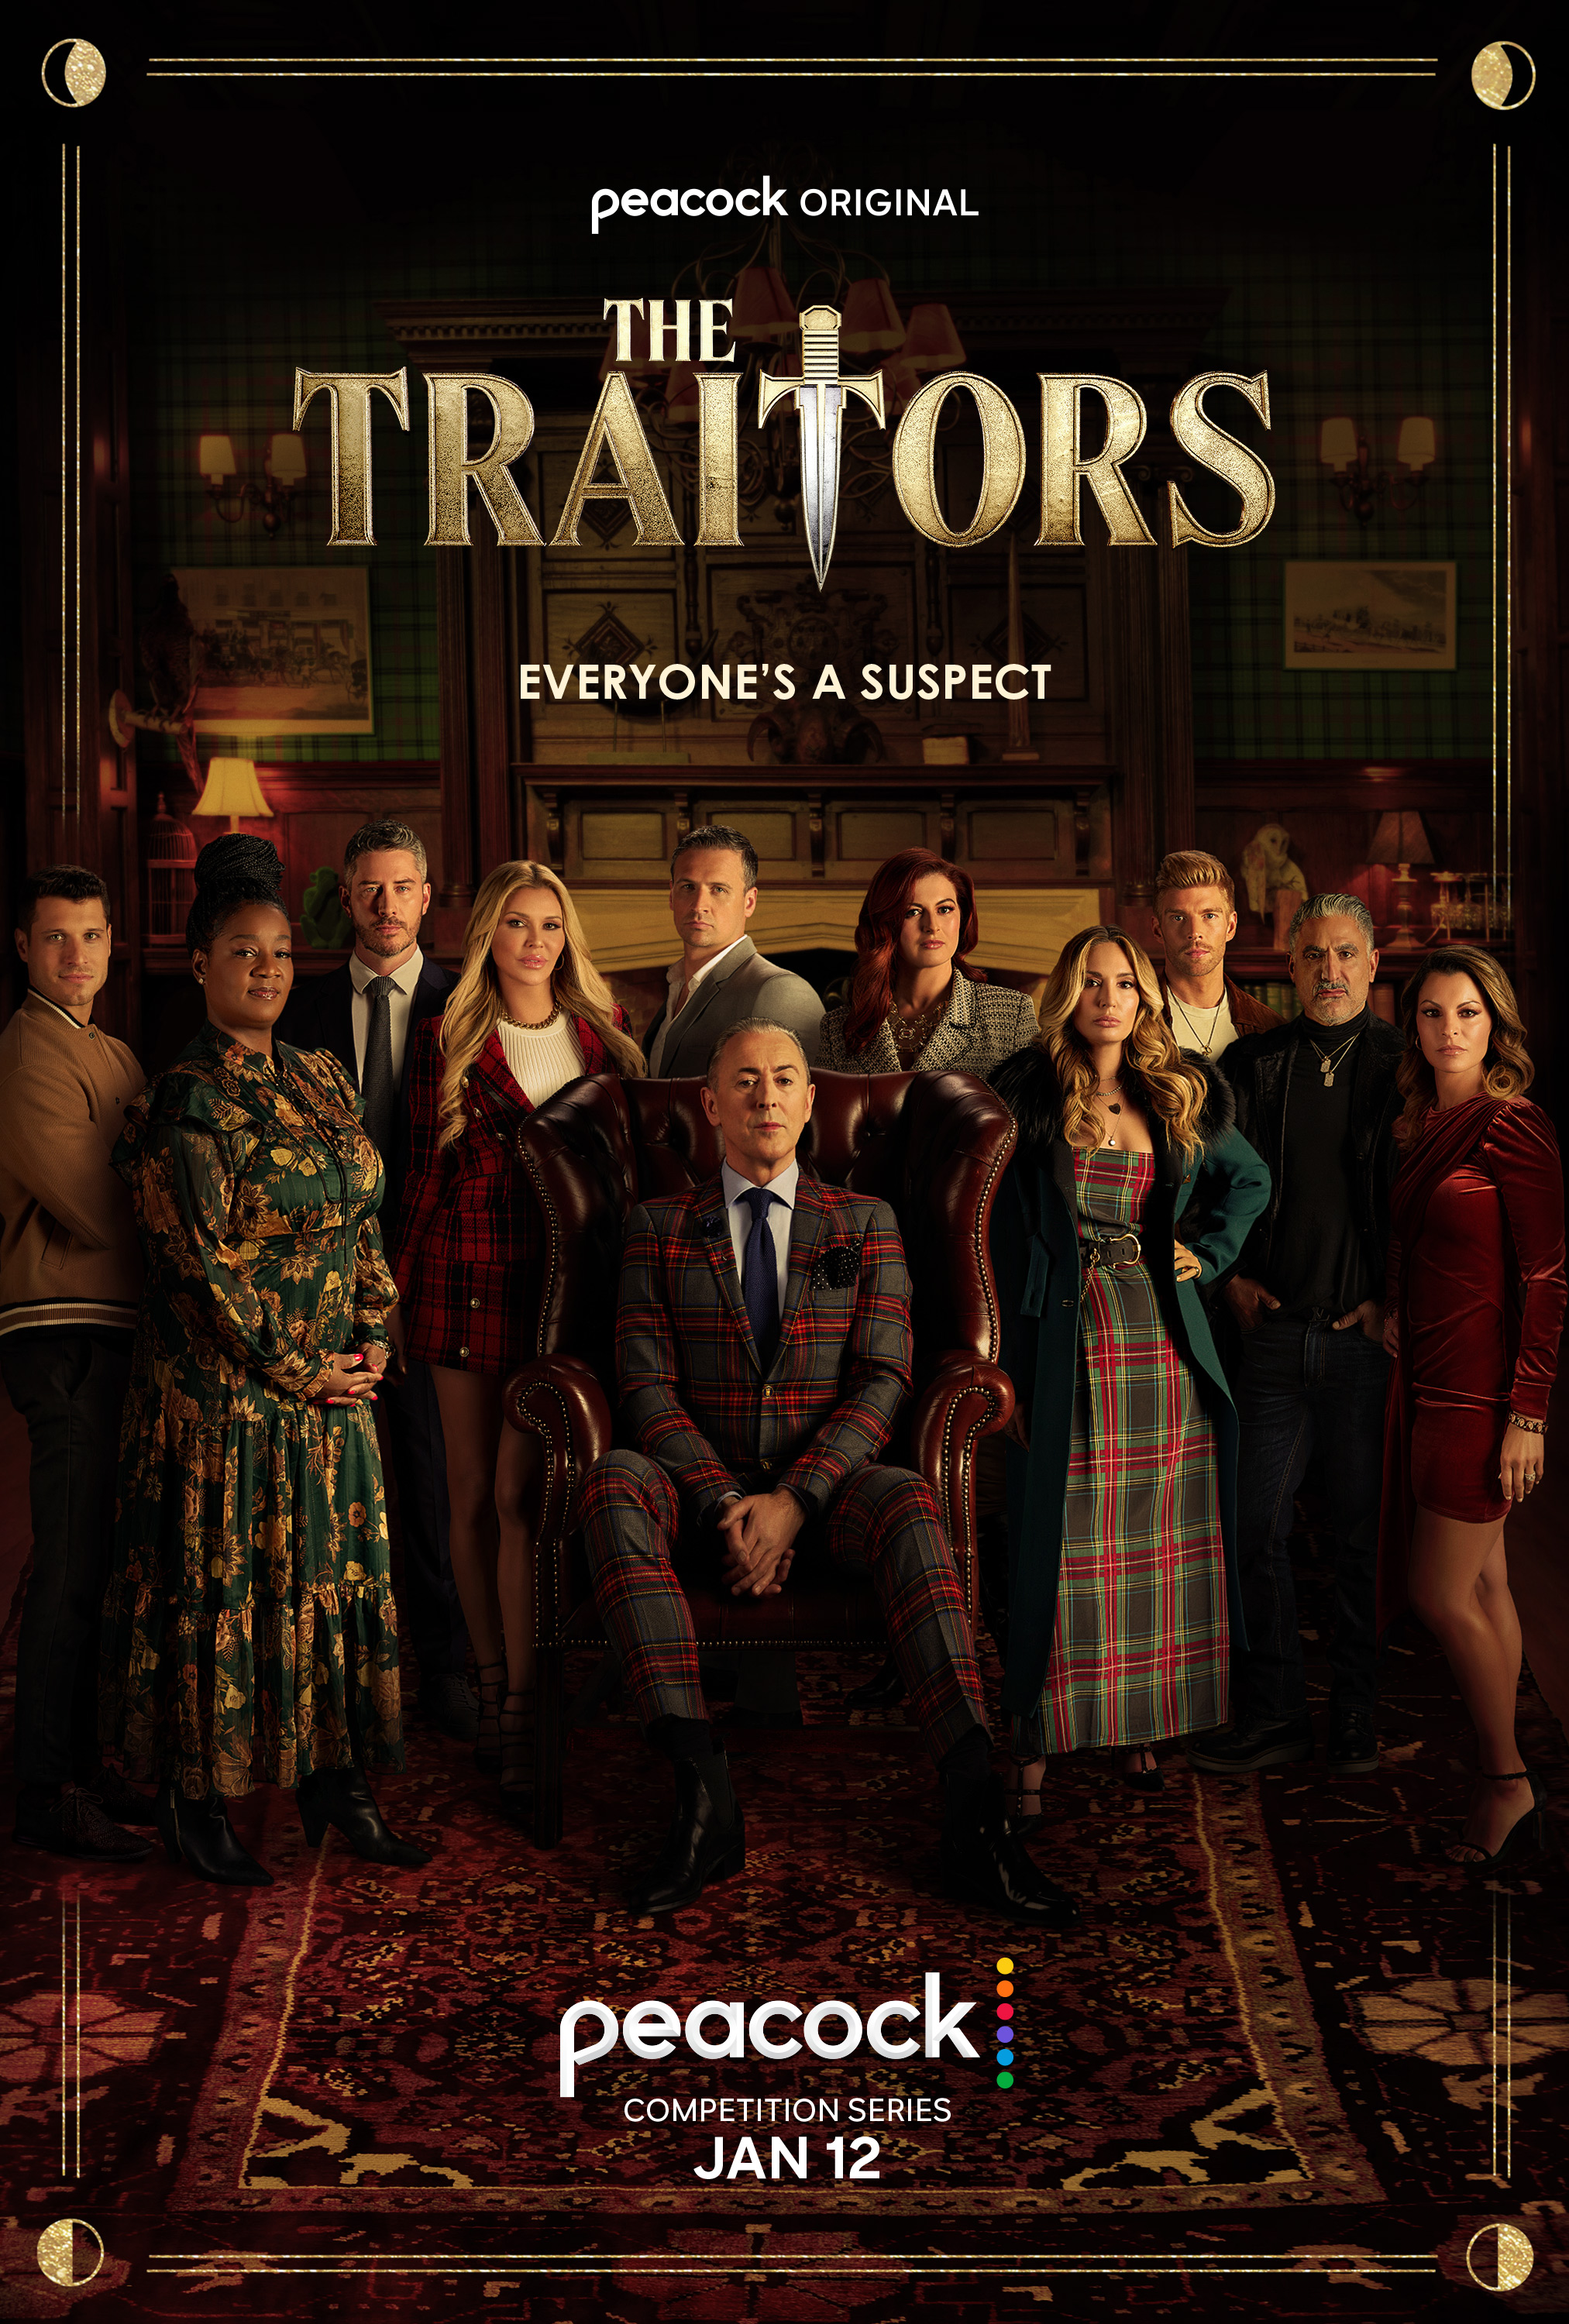 The Traitors US poster